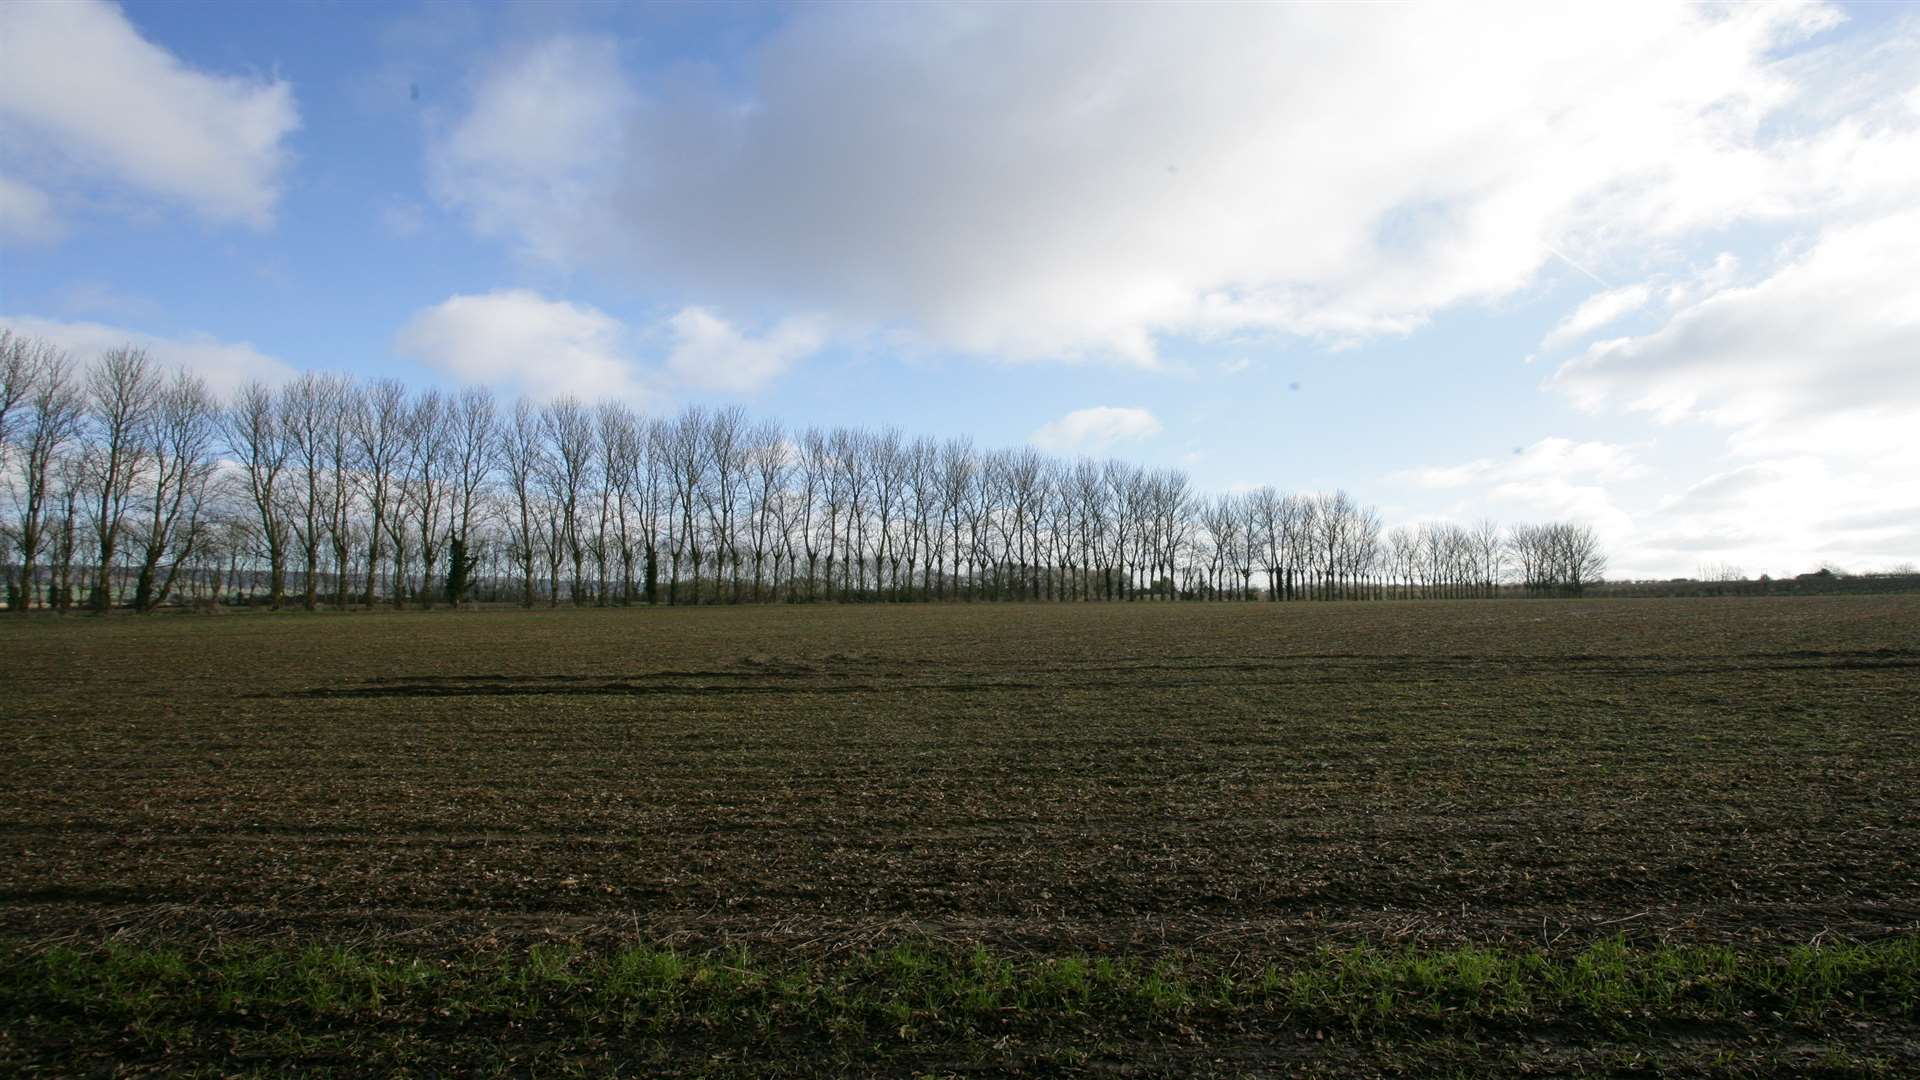 Plans have been approved to build up to 500 houses on this land off Hermitage Lane